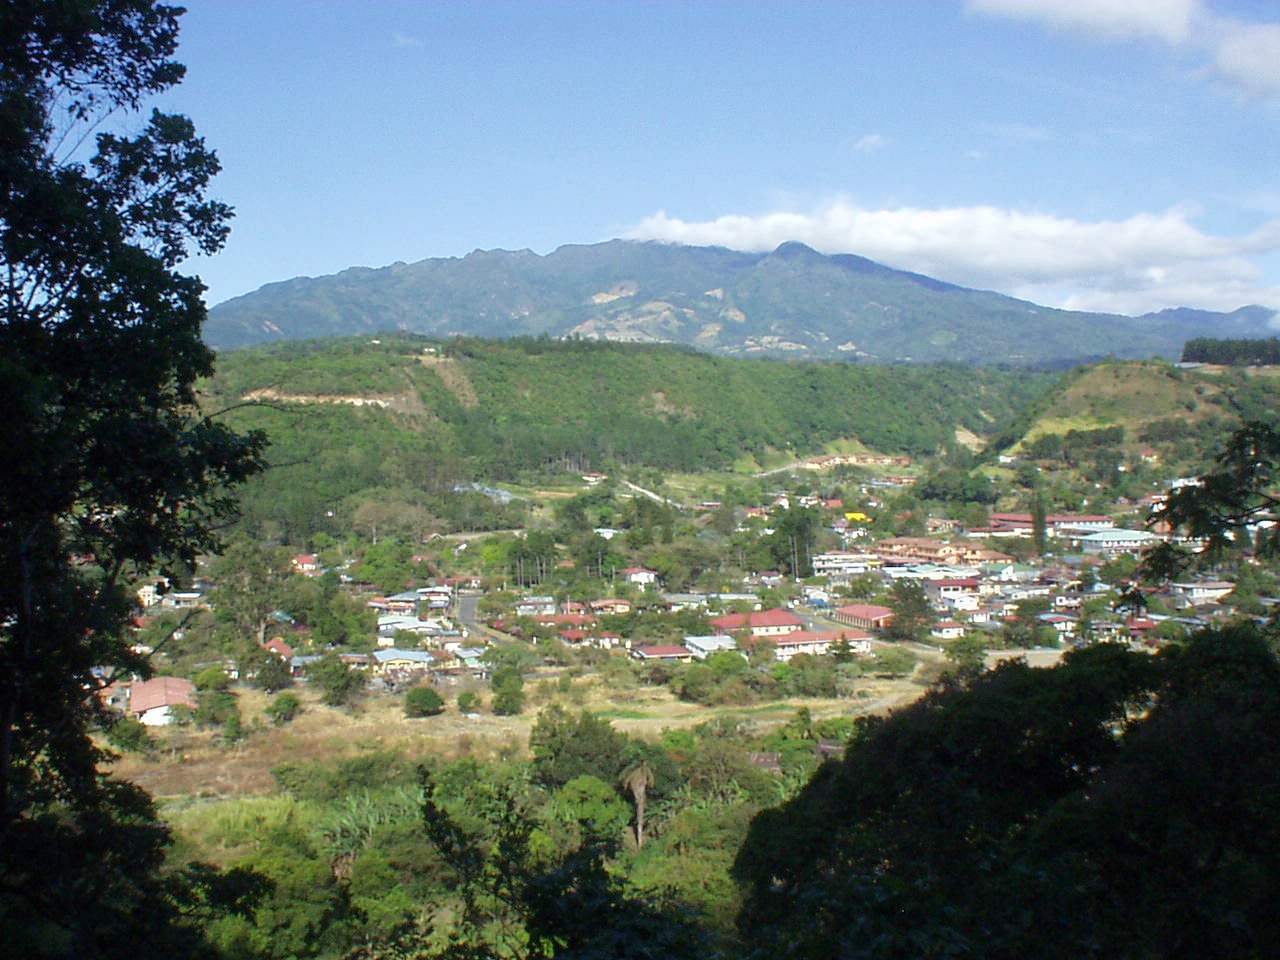 Overhead shot of Boquete from the road I ran on.